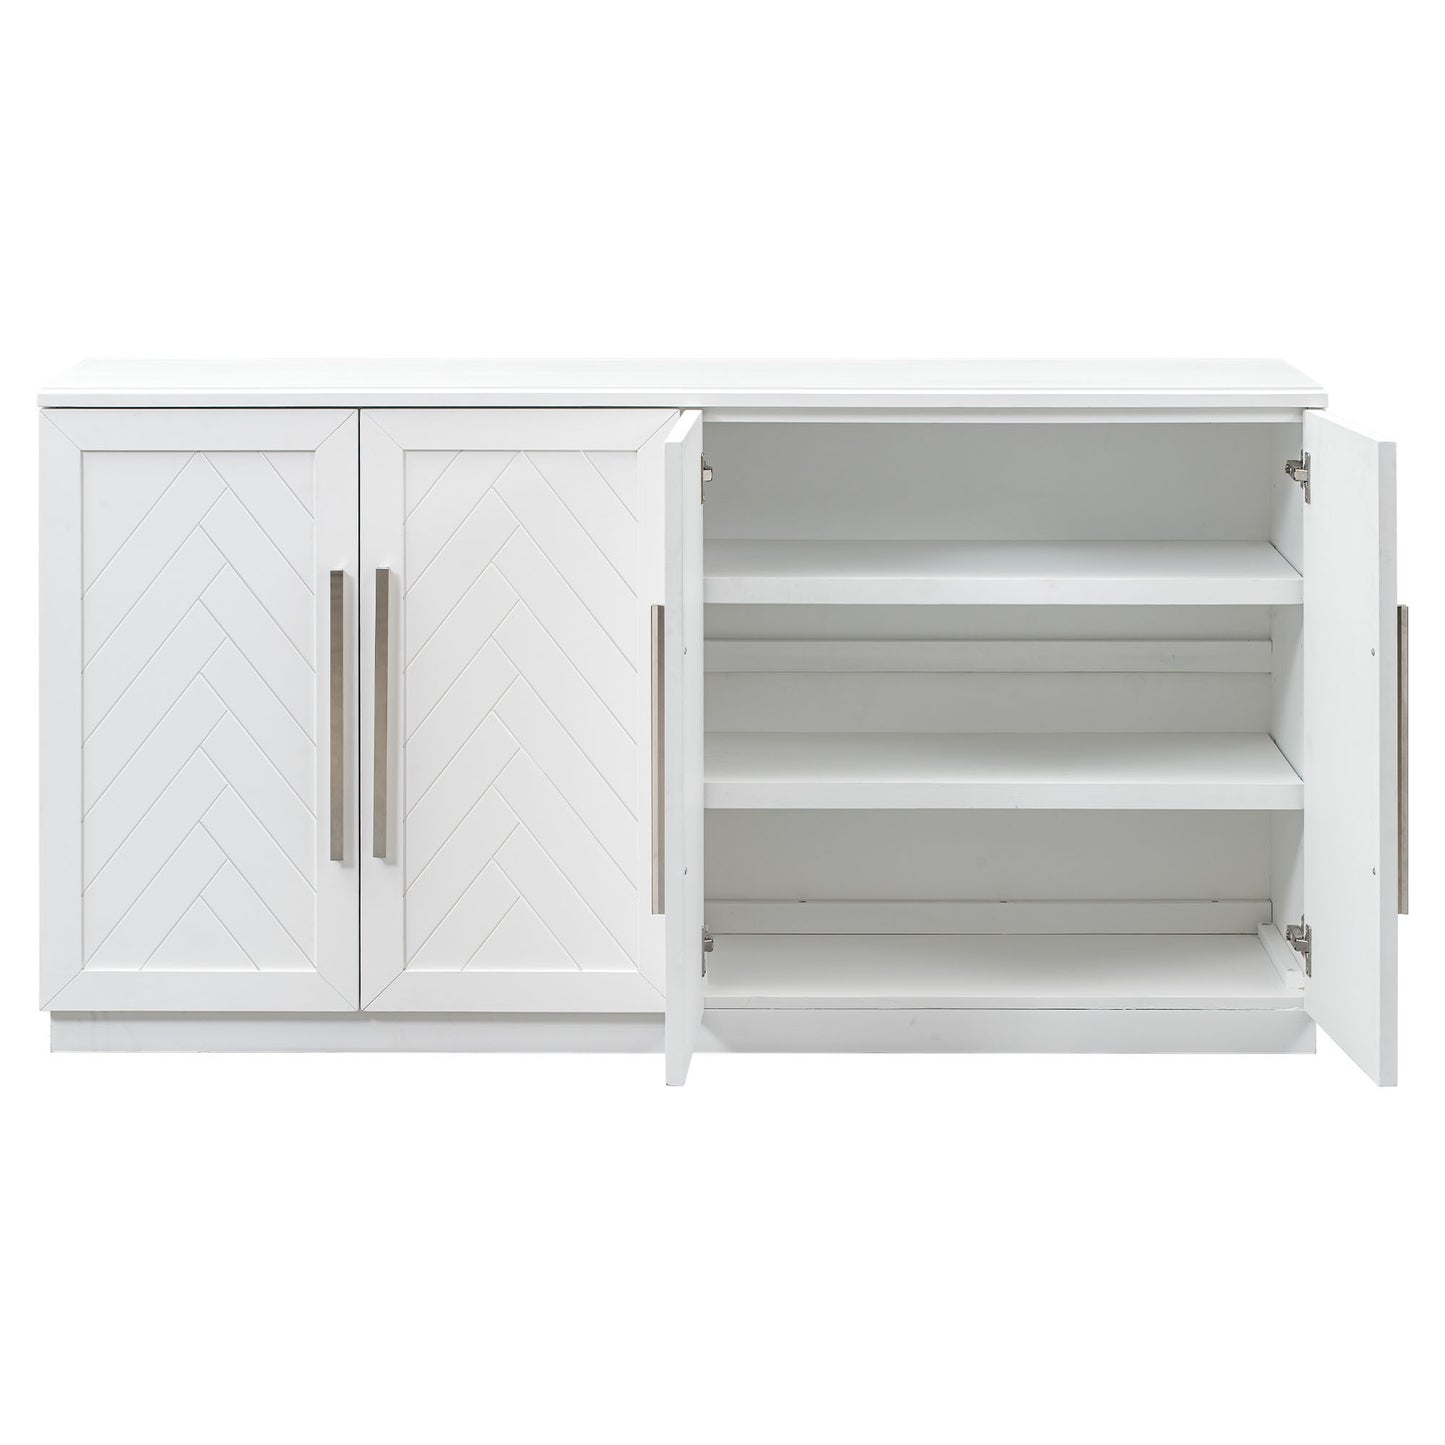 TREXM Sideboard with 4 Doors Large Storage Space Buffet Cabinet with Adjustable Shelves and Silver Handles for Kitchen, Dining Room, Living Room (White)